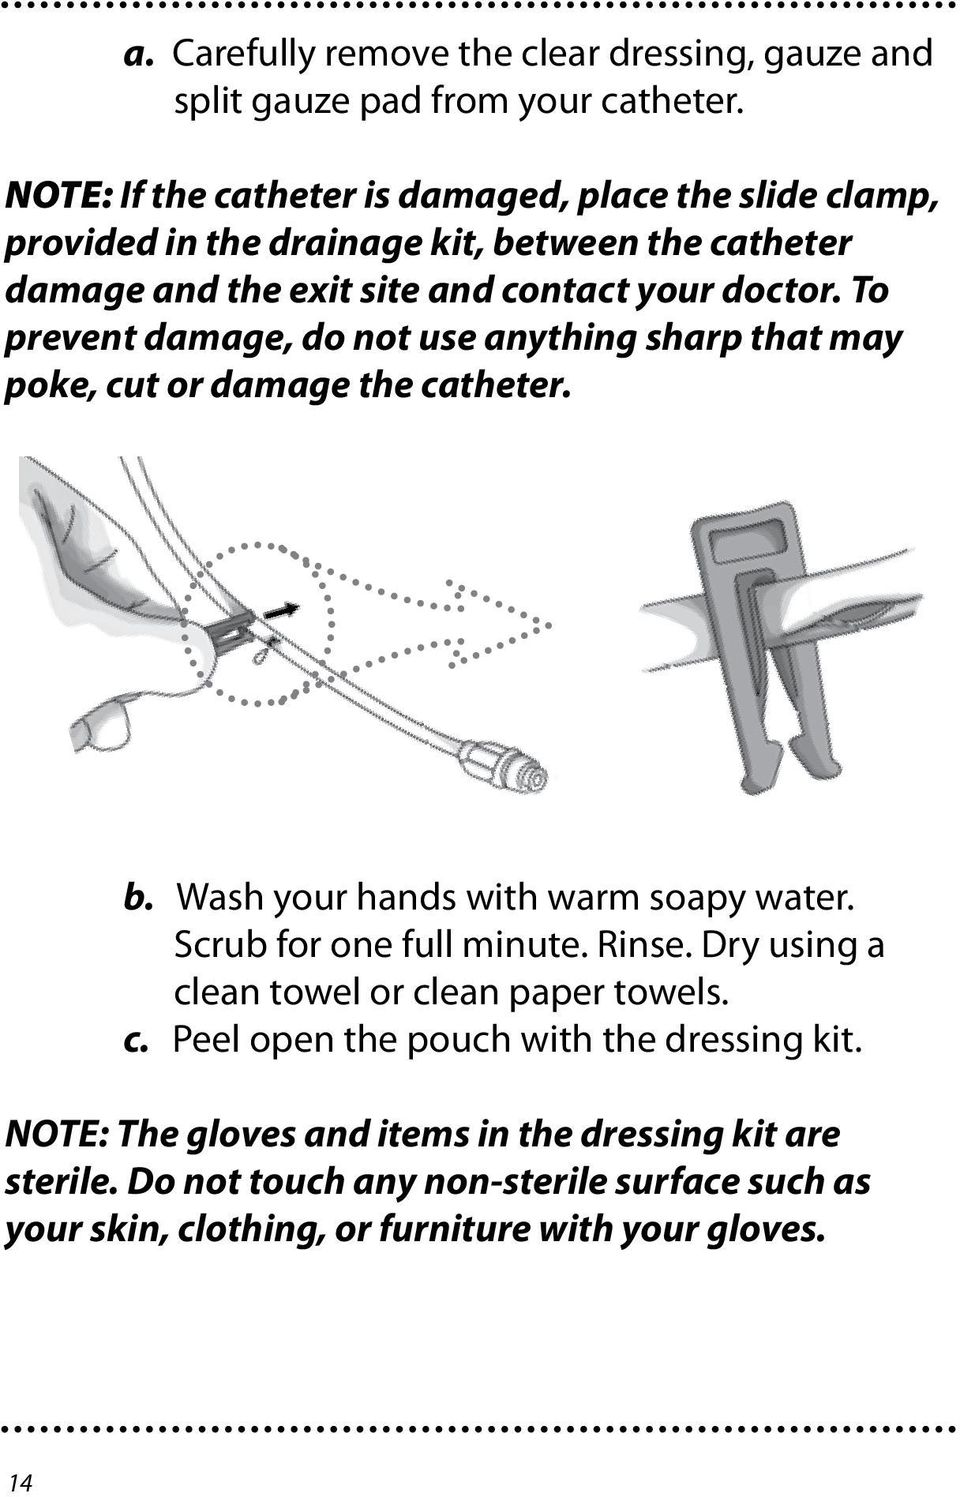 To prevent damage, do not use anything sharp that may poke, cut or damage the catheter. b. Wash your hands with warm soapy water. Scrub for one full minute. Rinse.